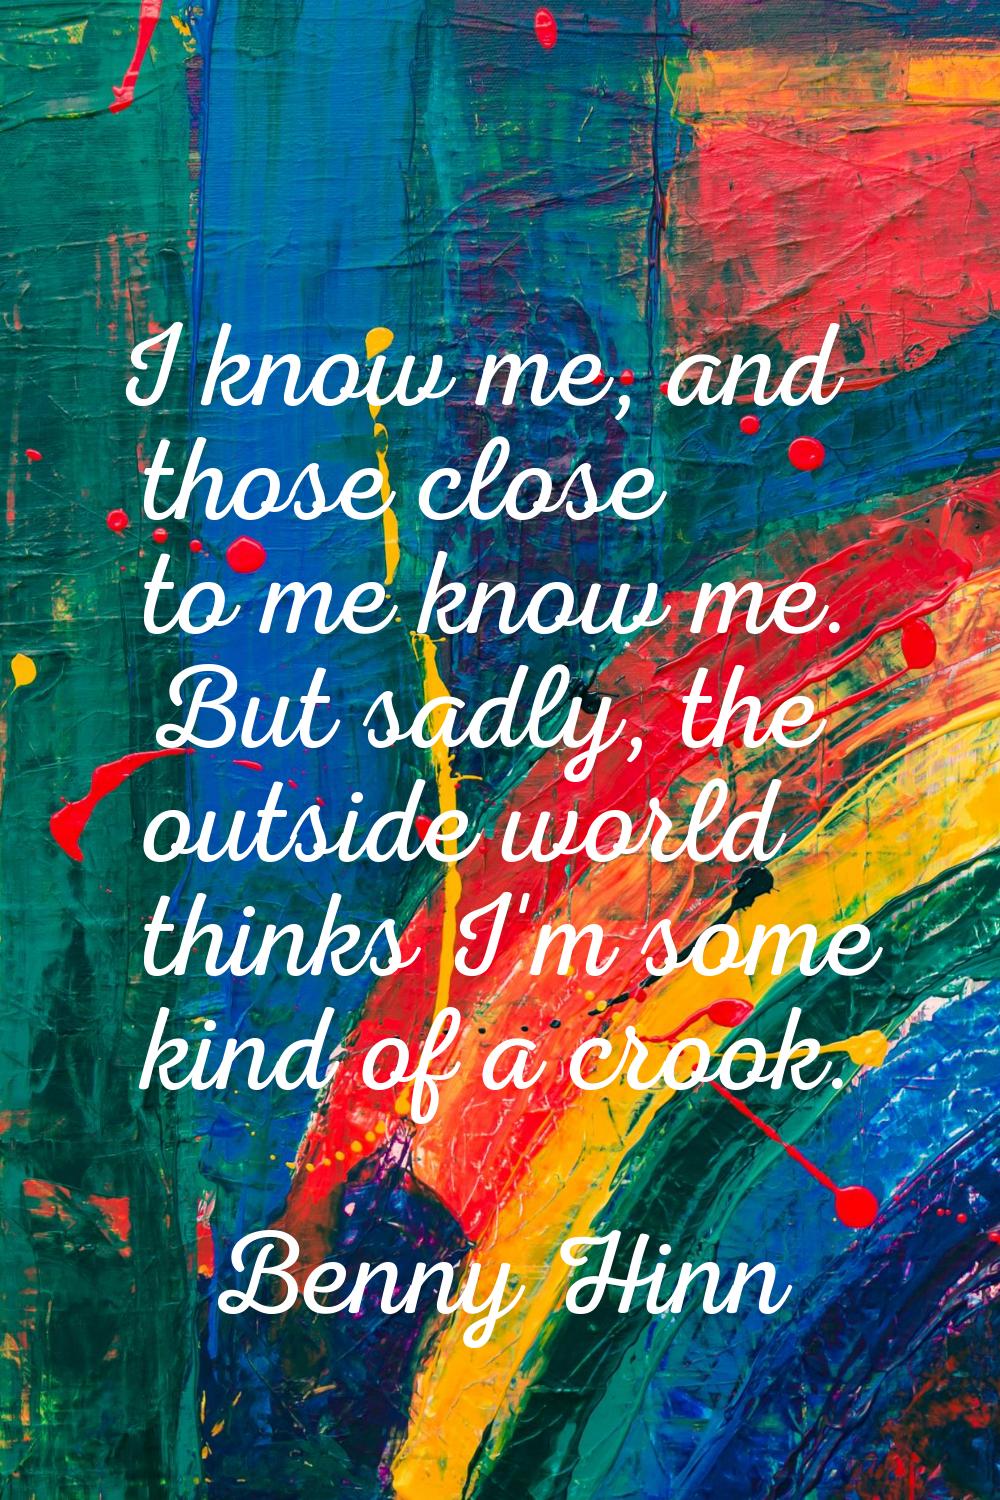 I know me, and those close to me know me. But sadly, the outside world thinks I'm some kind of a cr